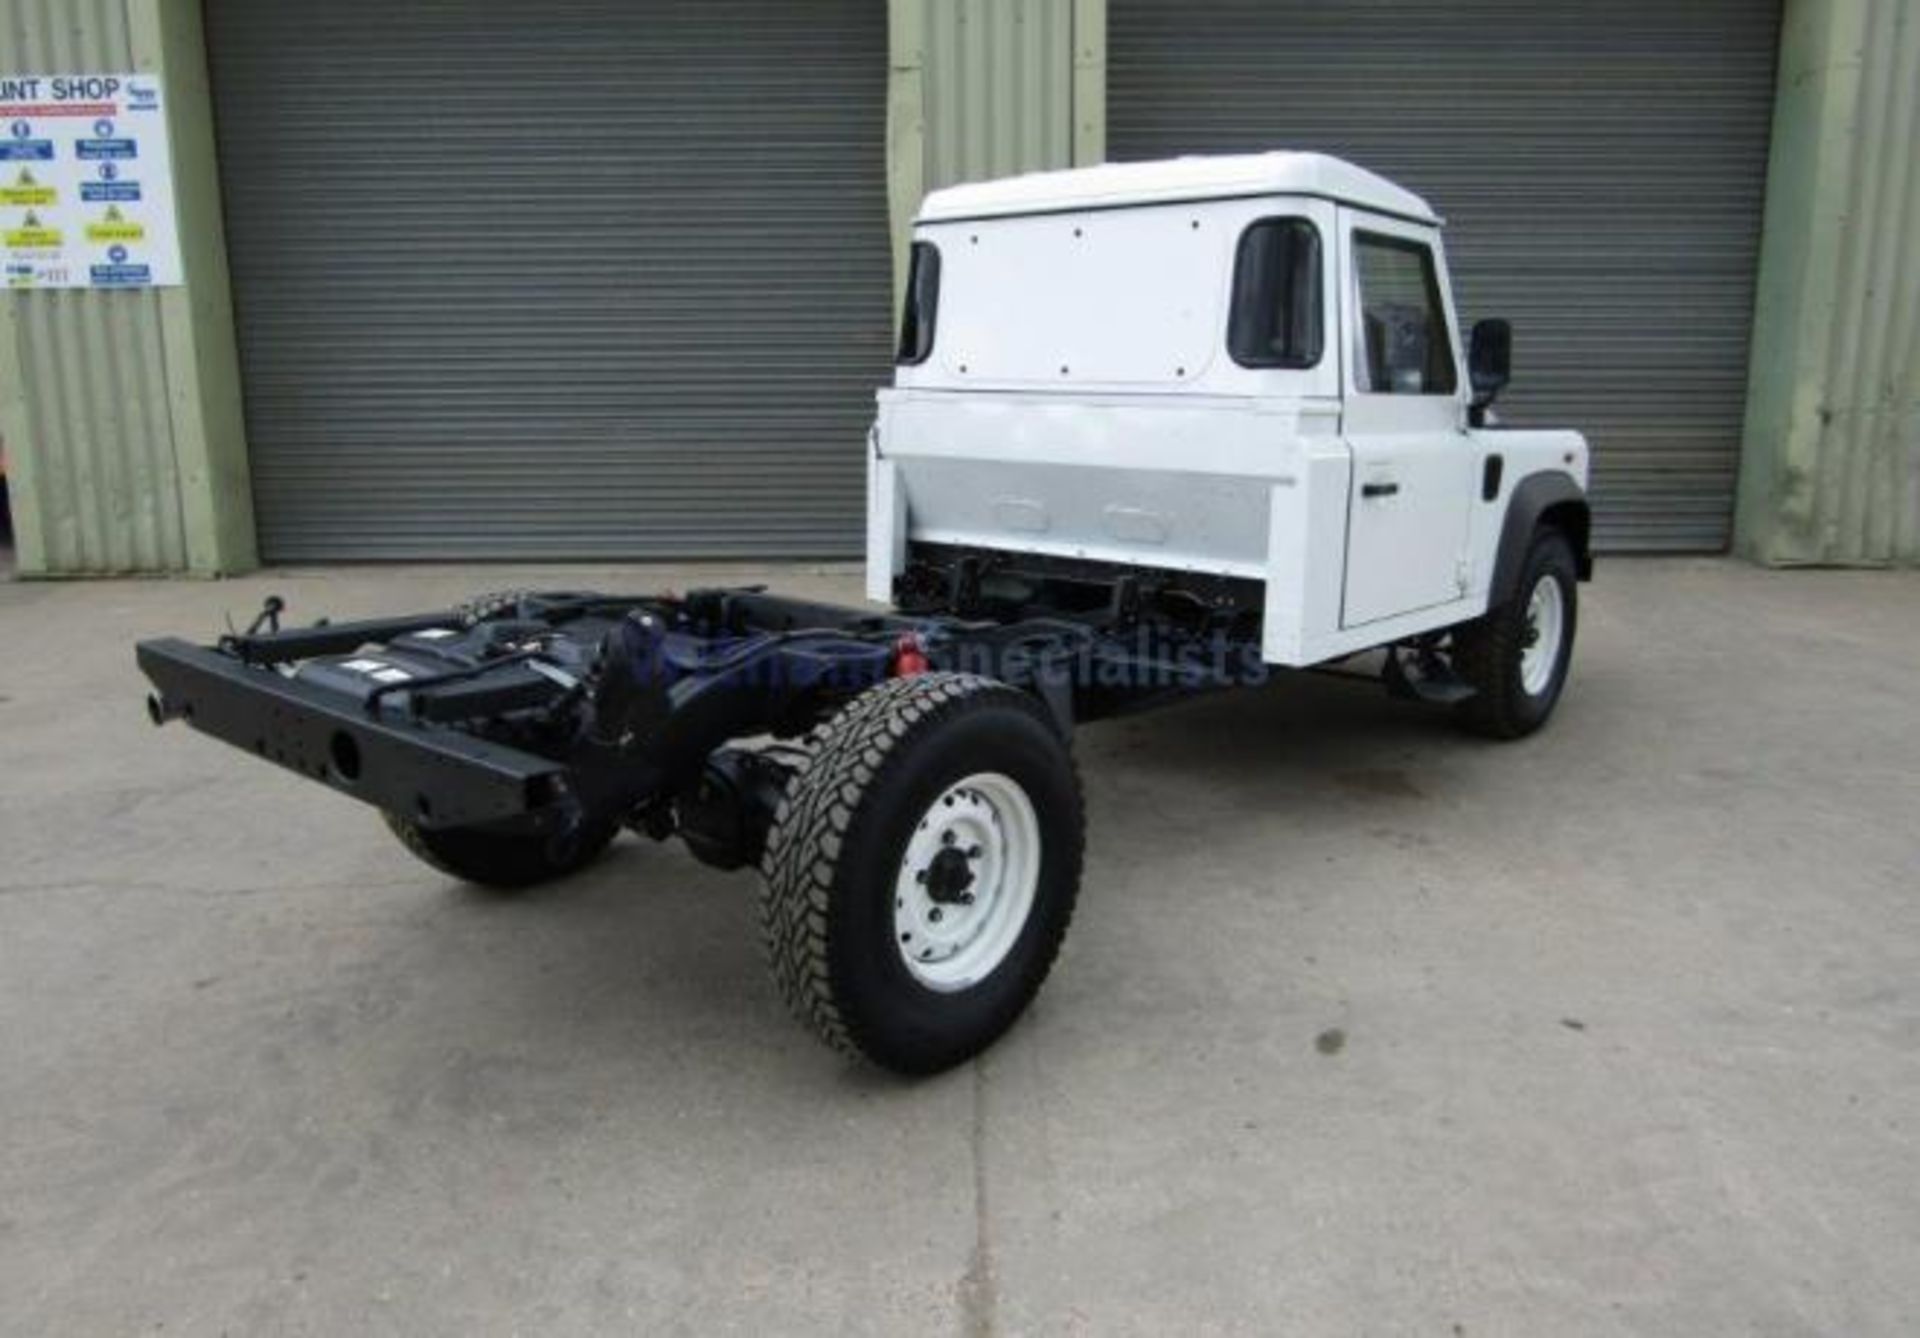 NEW UNUSED Export Specification Land Rover Defender Armoured 130 Chassis Cab - Bild 6 aus 19